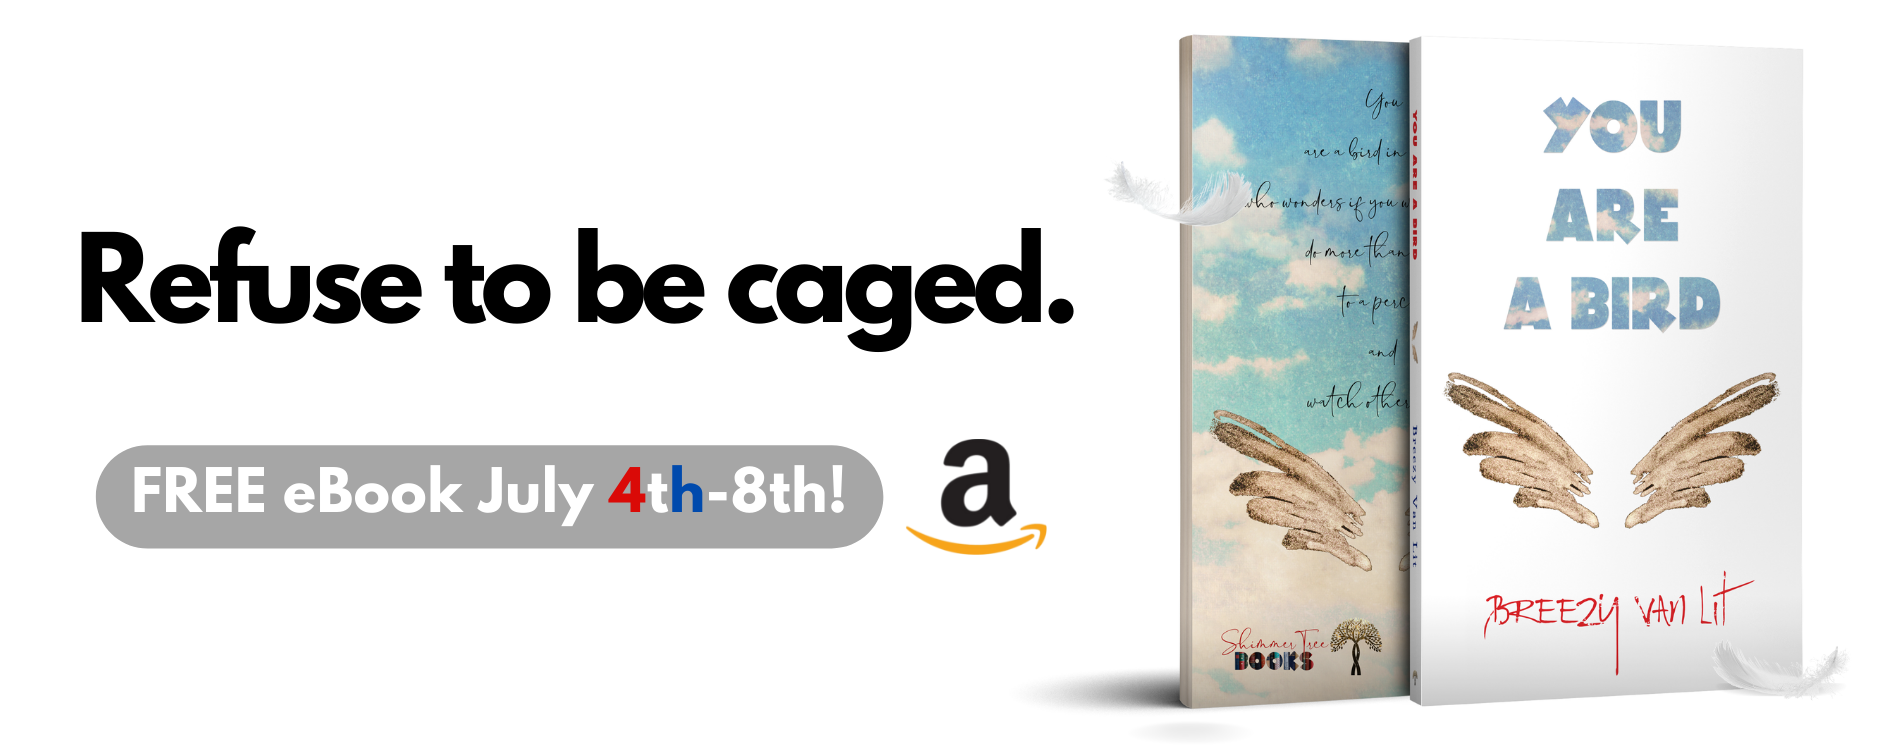 The eBook of You Are a Bird is available for free on Amazon July 4-8